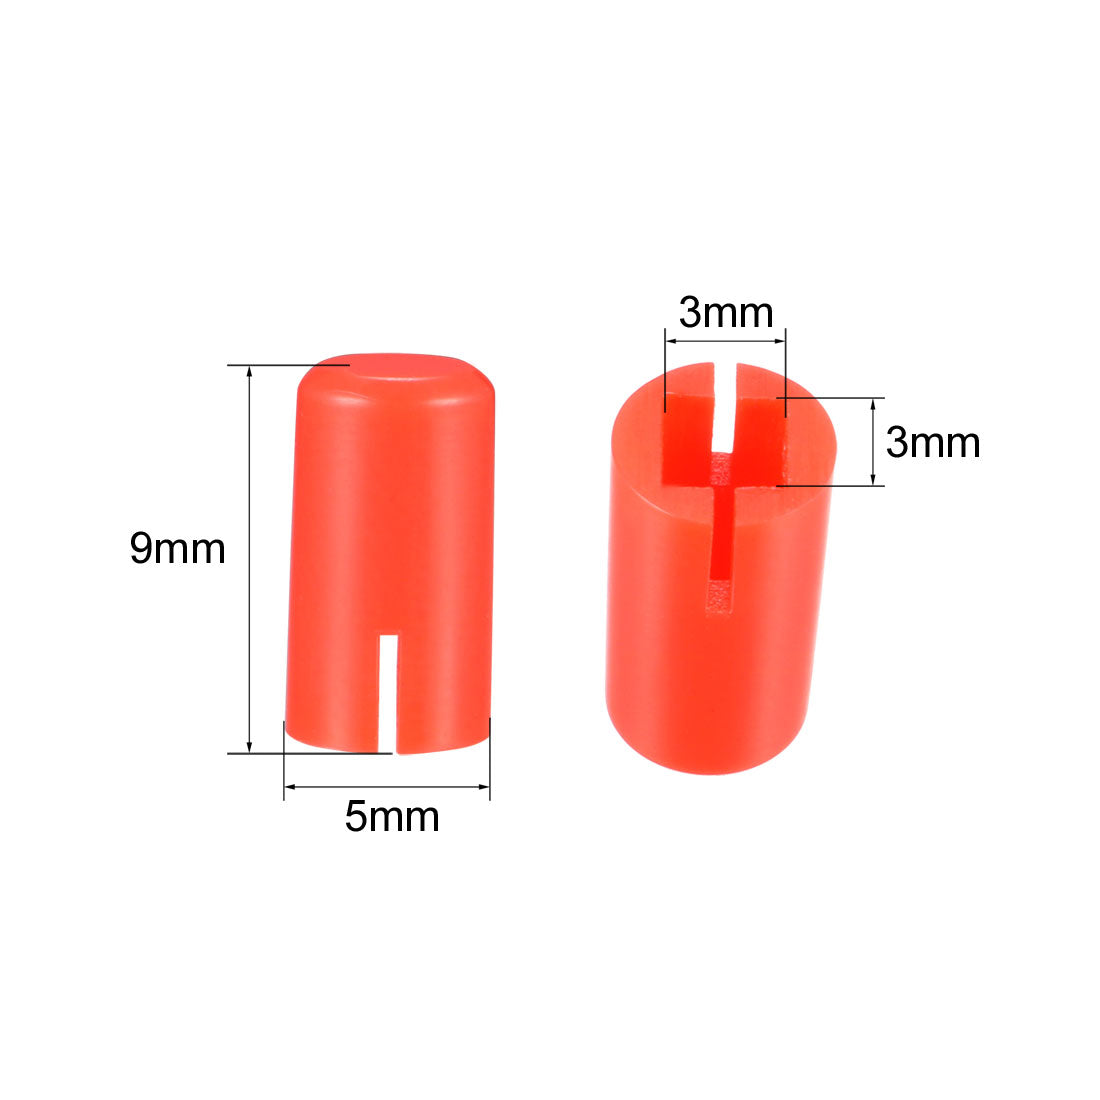 uxcell Uxcell 50Pcs Plastic 5x9mm Pushbutton Tactile Switch Caps Cover Keycaps Red for 6x6x7.3mm Tact Switch